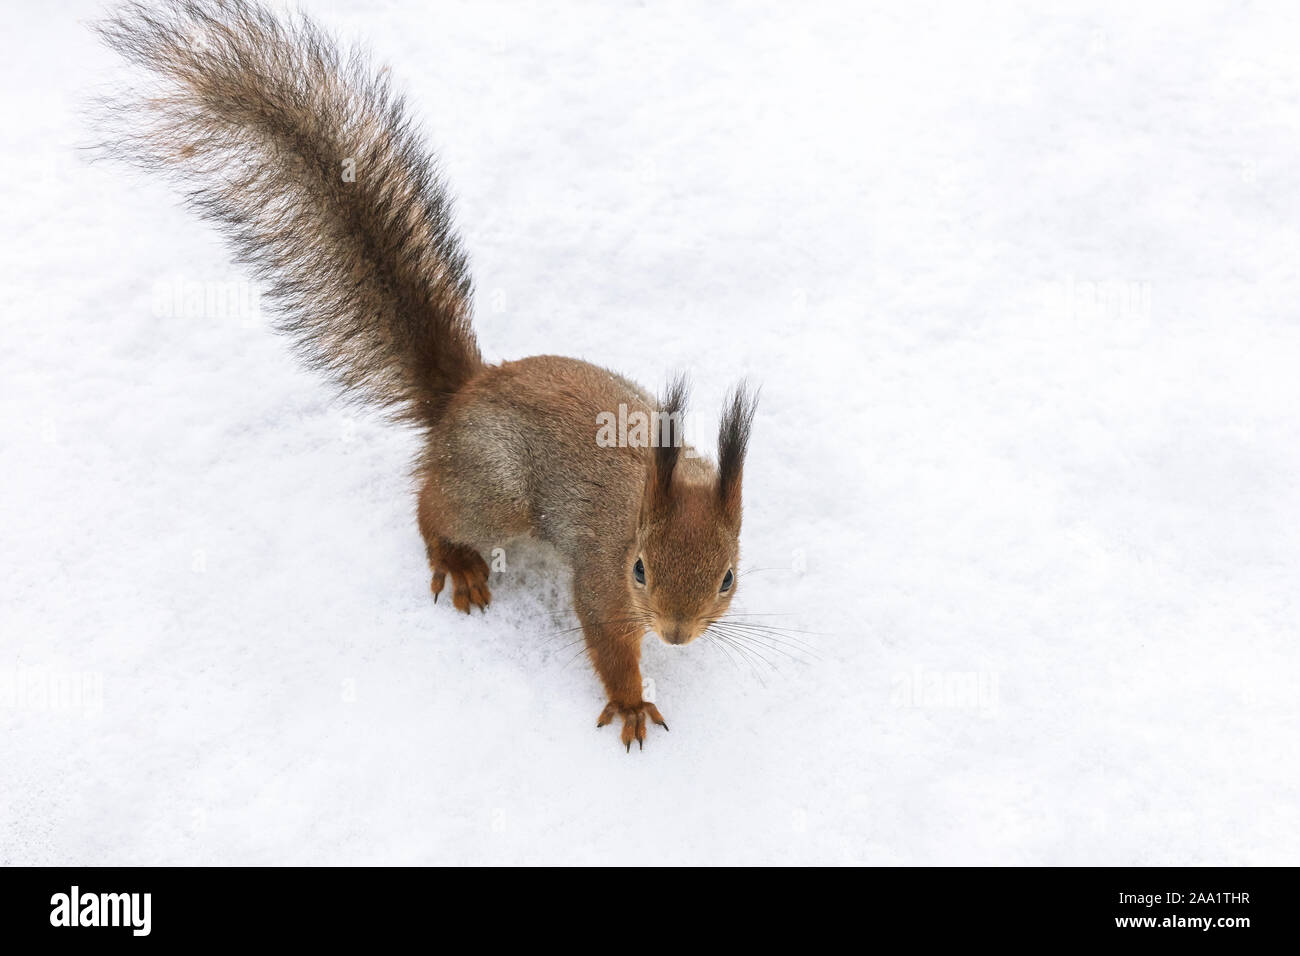 hungry little red squirrel searching for meal in winter park, closeup image Stock Photo